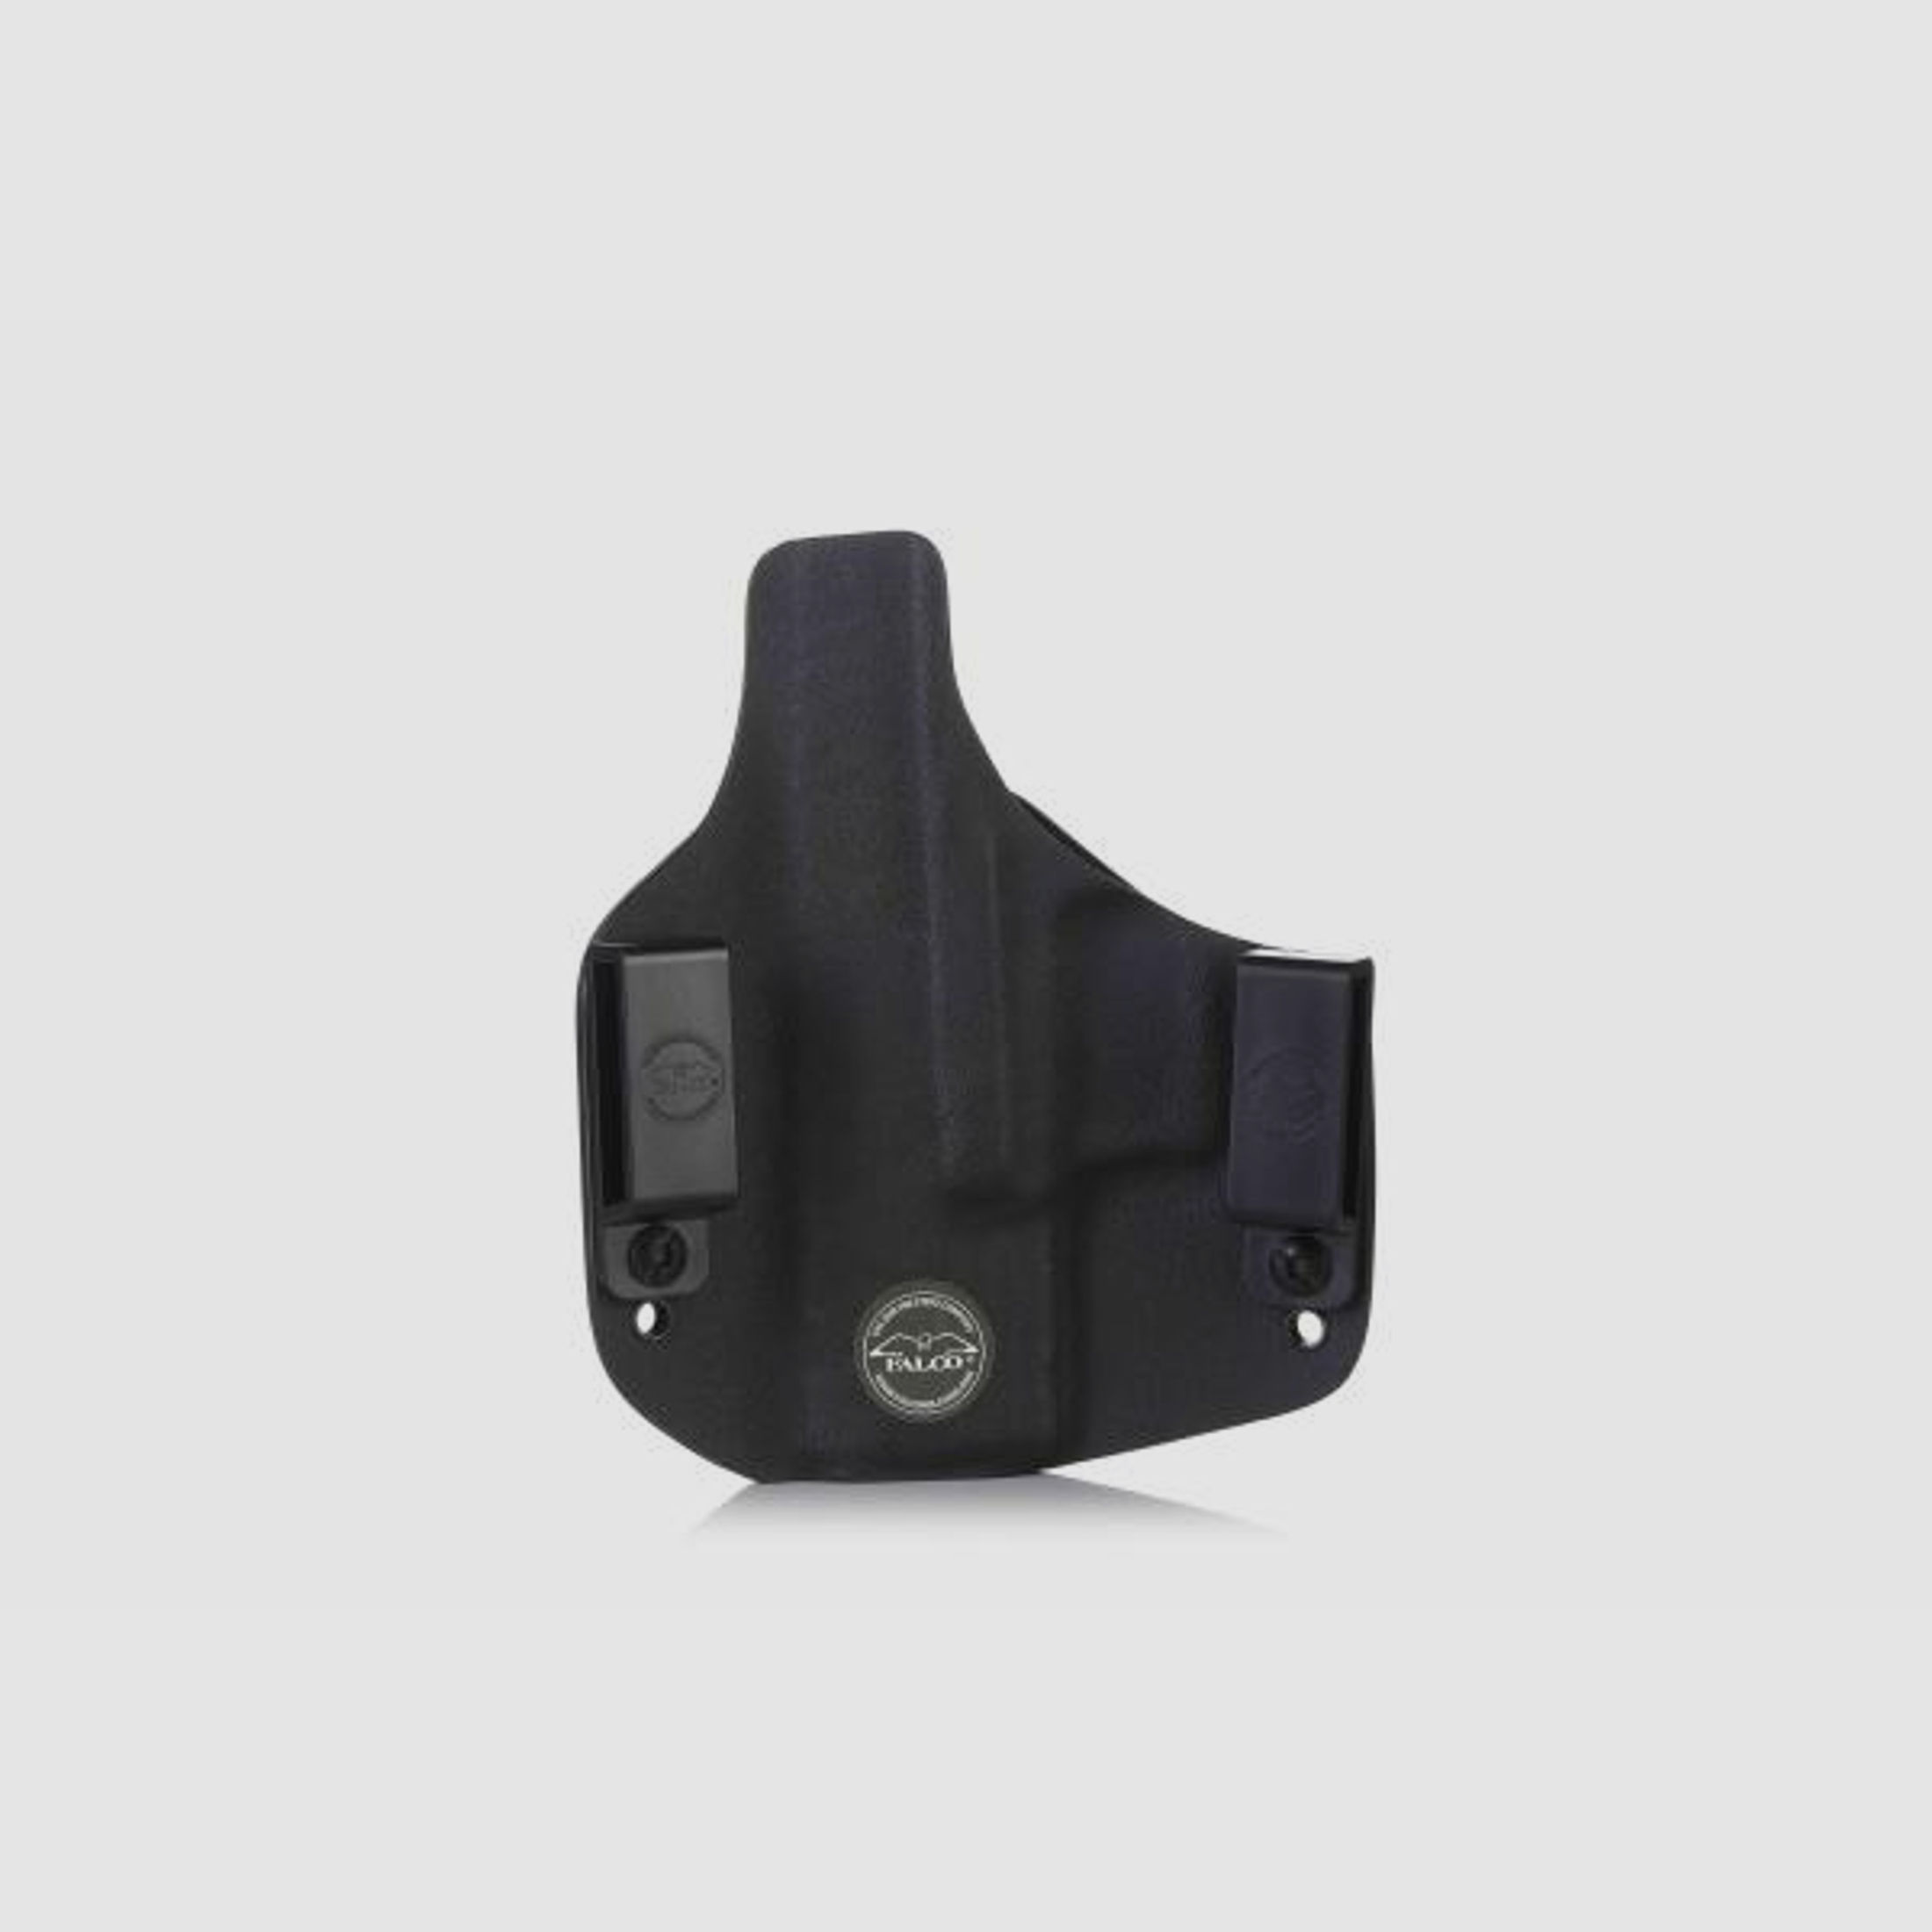 FALCO Holster Holster (Polymer) f. CZ Shadow 2 Kydex OWB